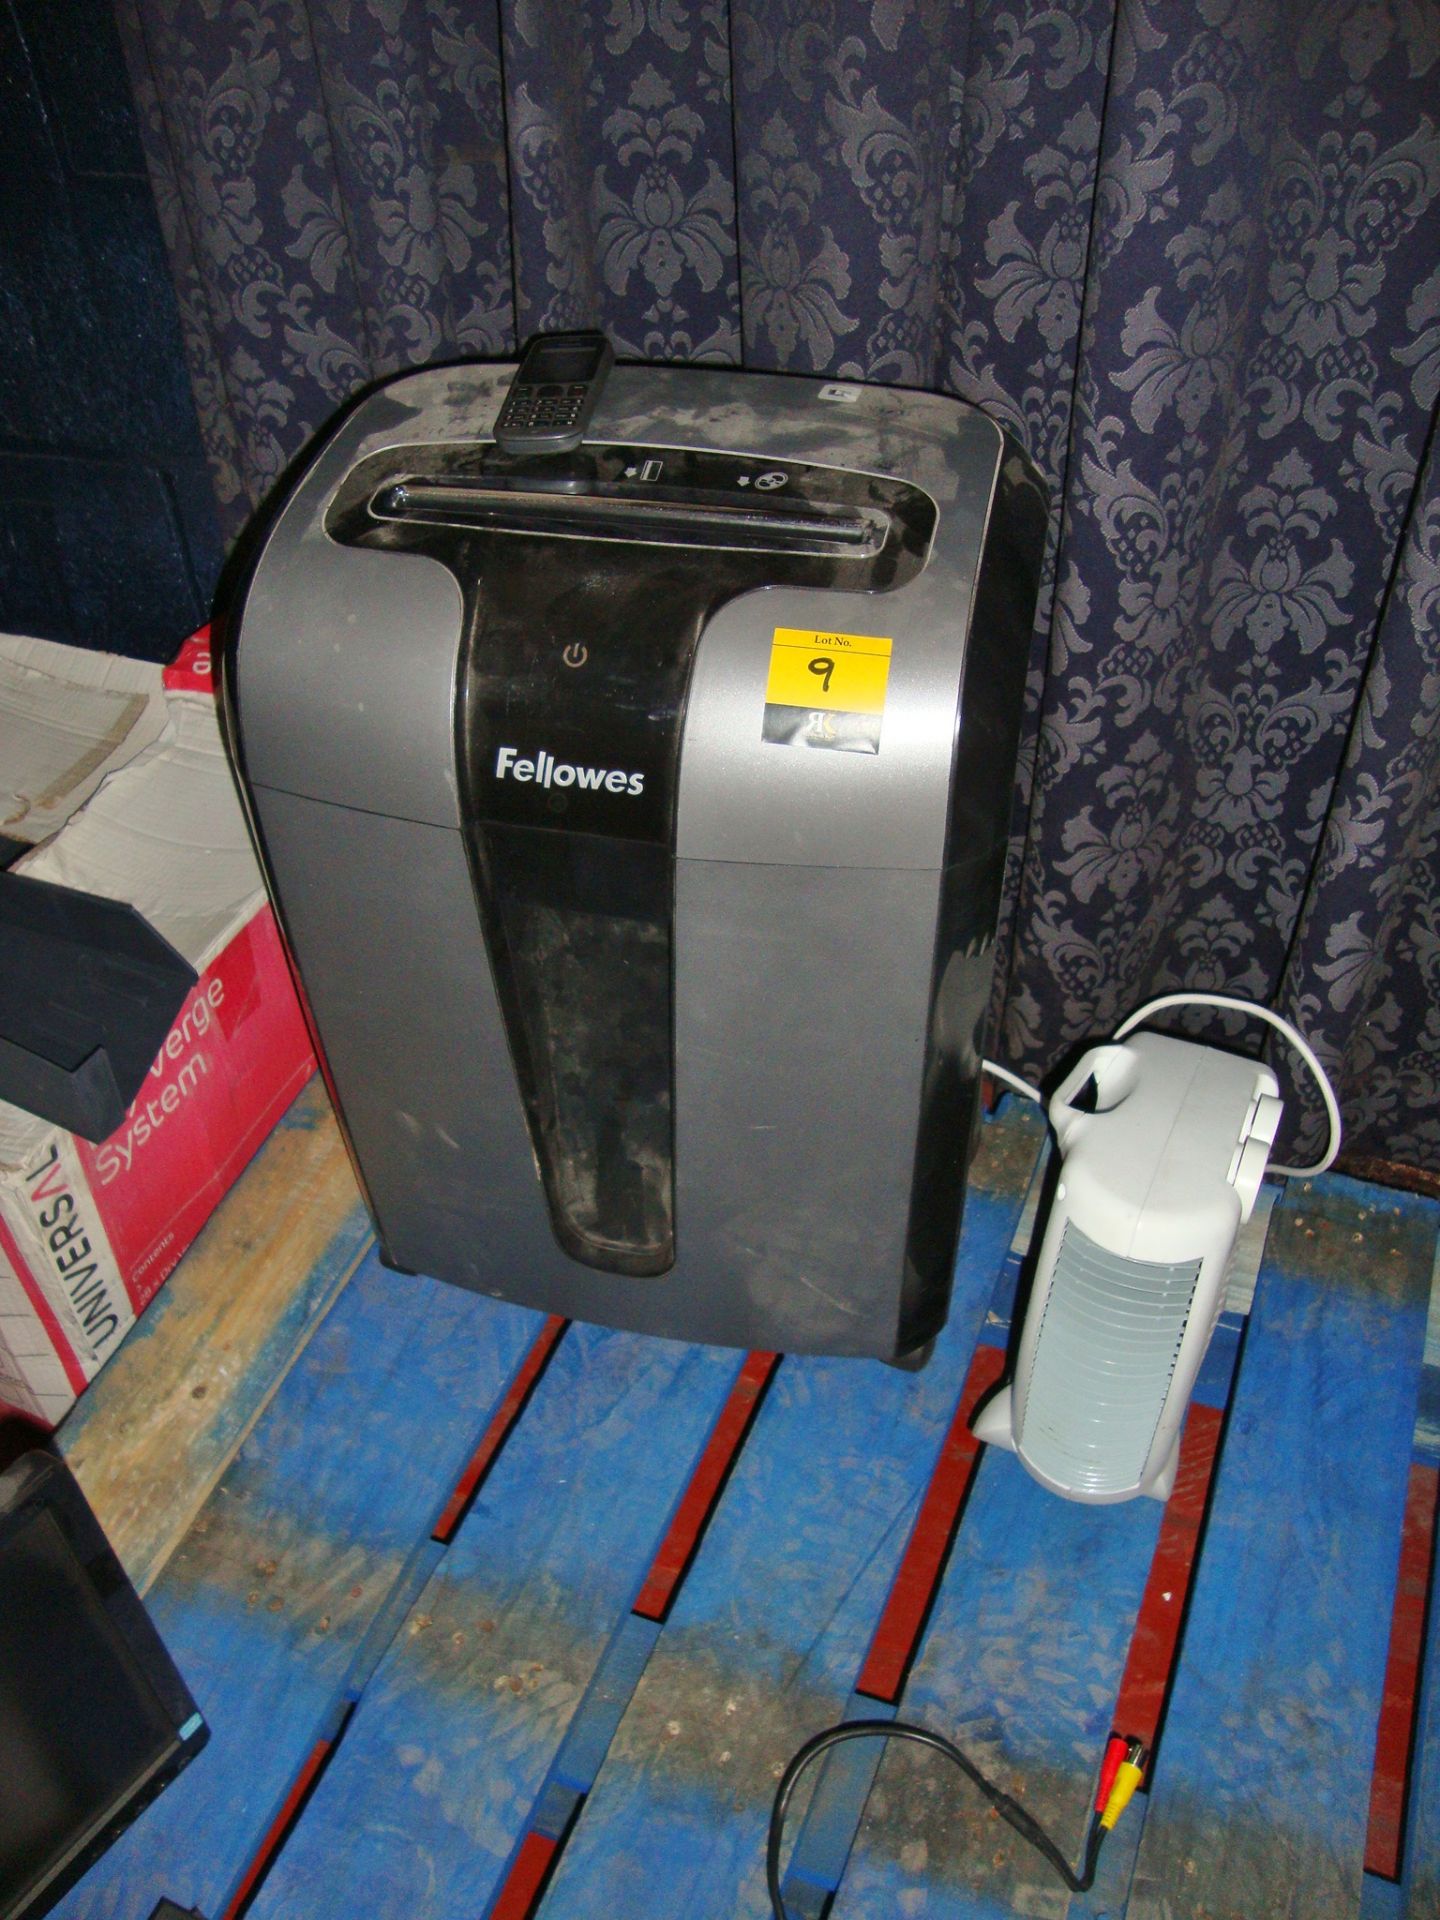 Office equipment comprising Fellowes shredder, Nokia mobile phone and small fan heater